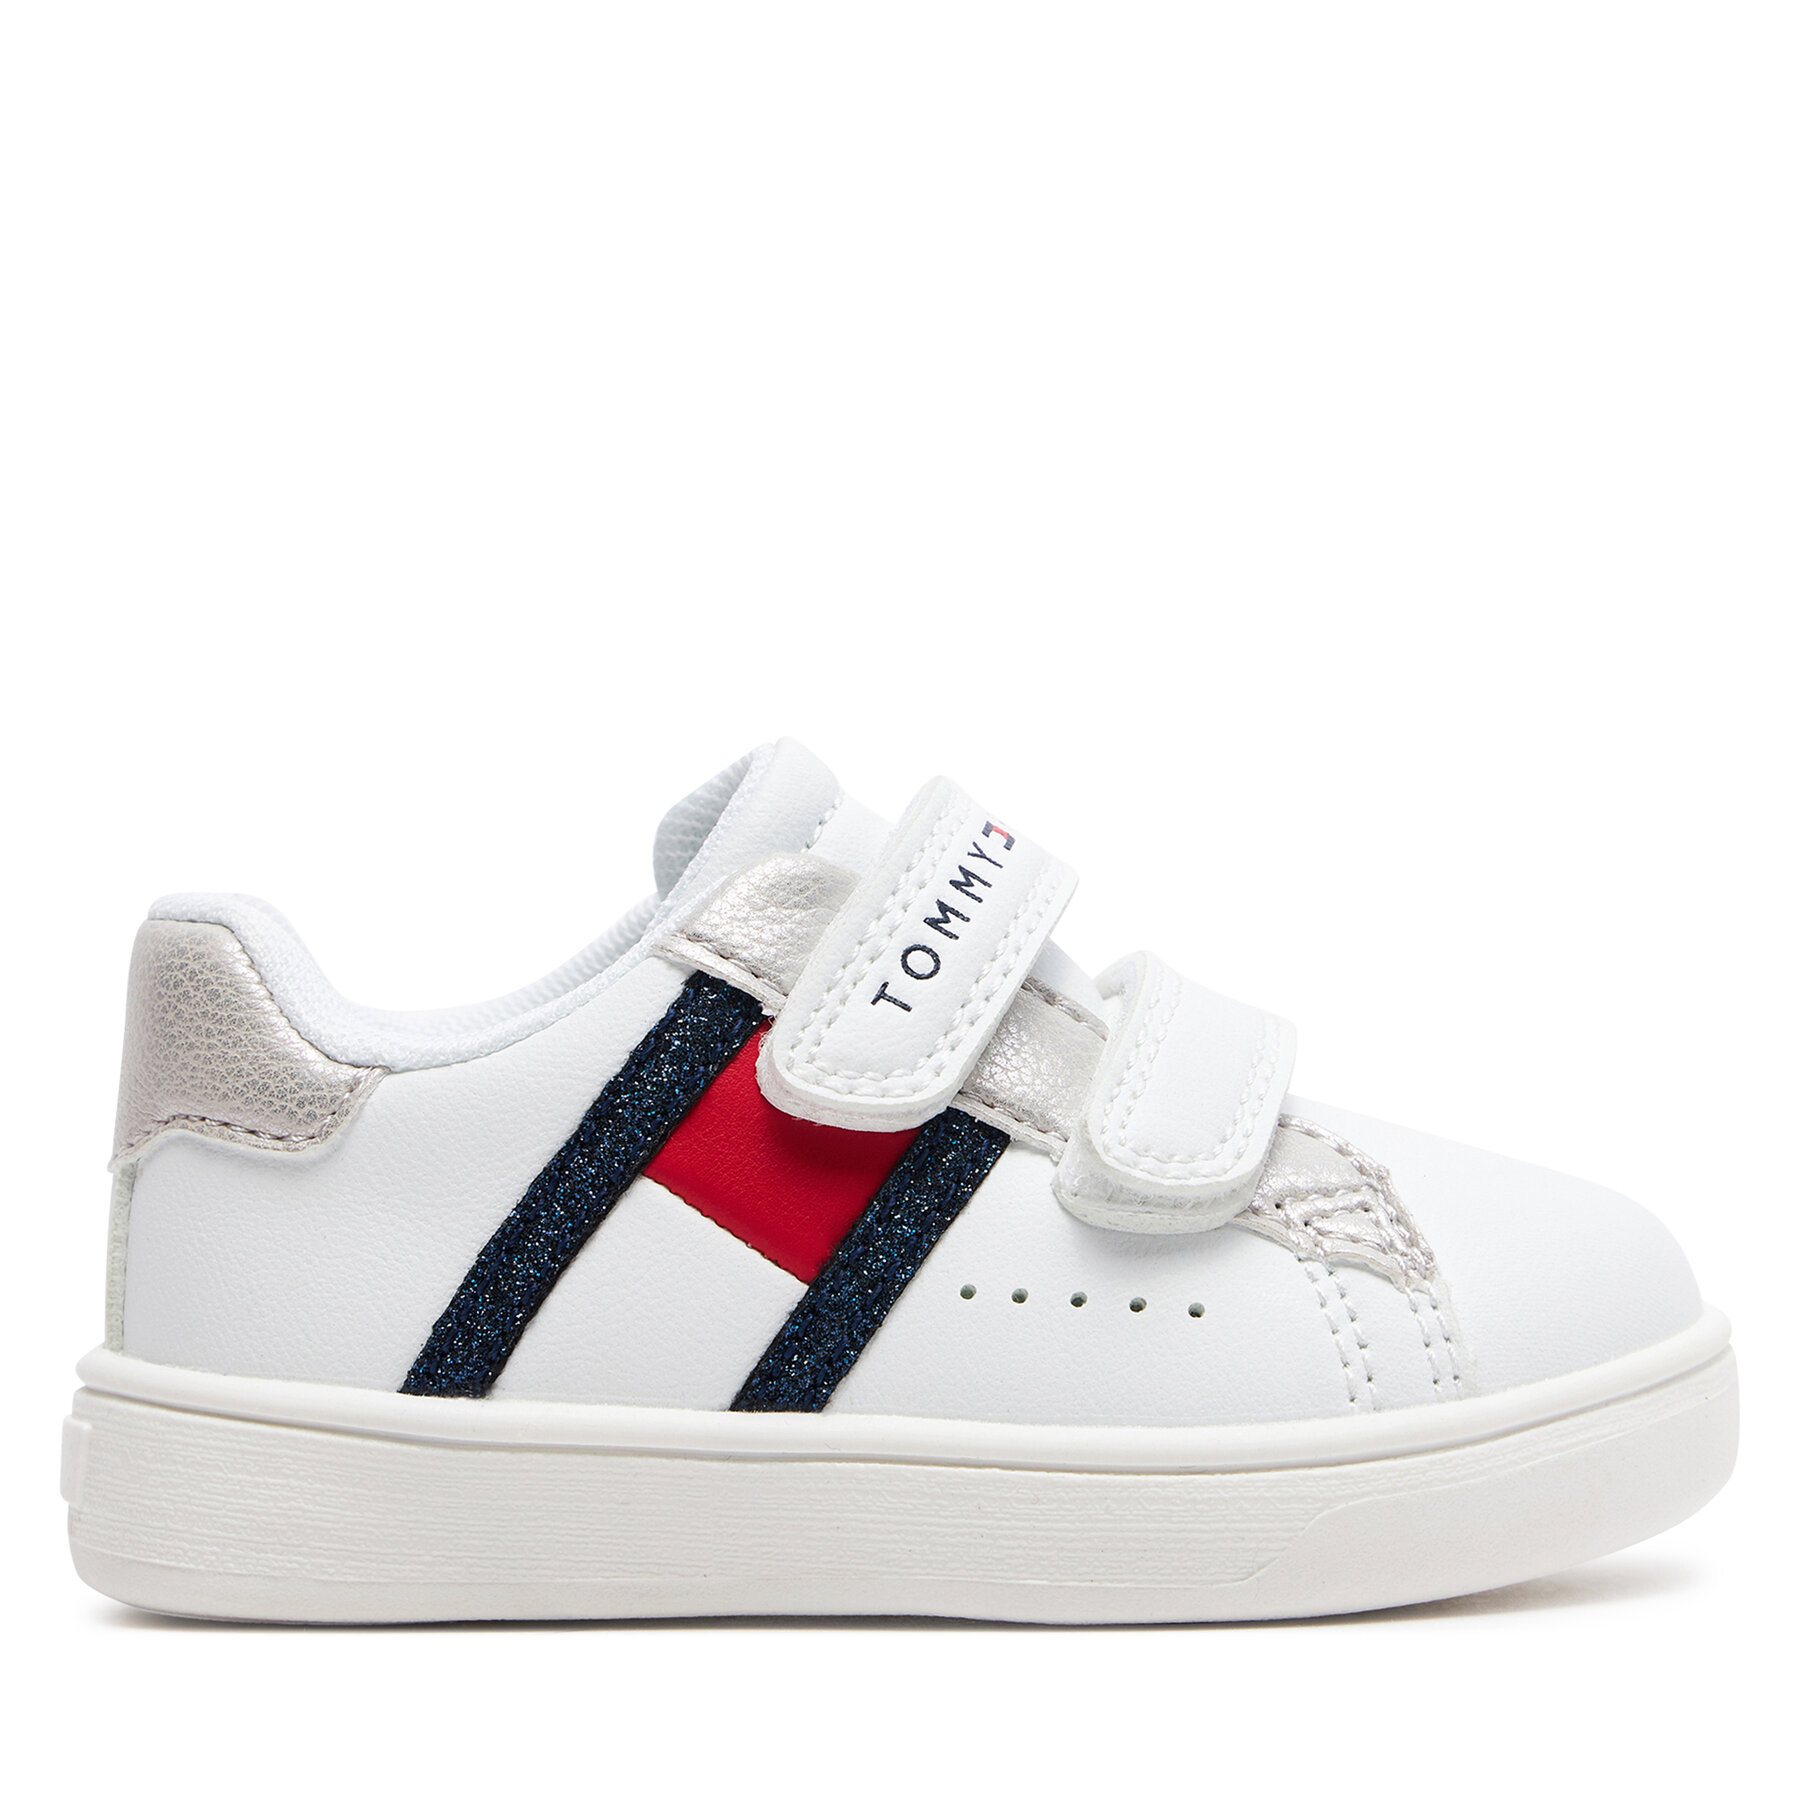 Tenisice Tommy Hilfiger T1A9-33190-1439 Bianco/Argento X025